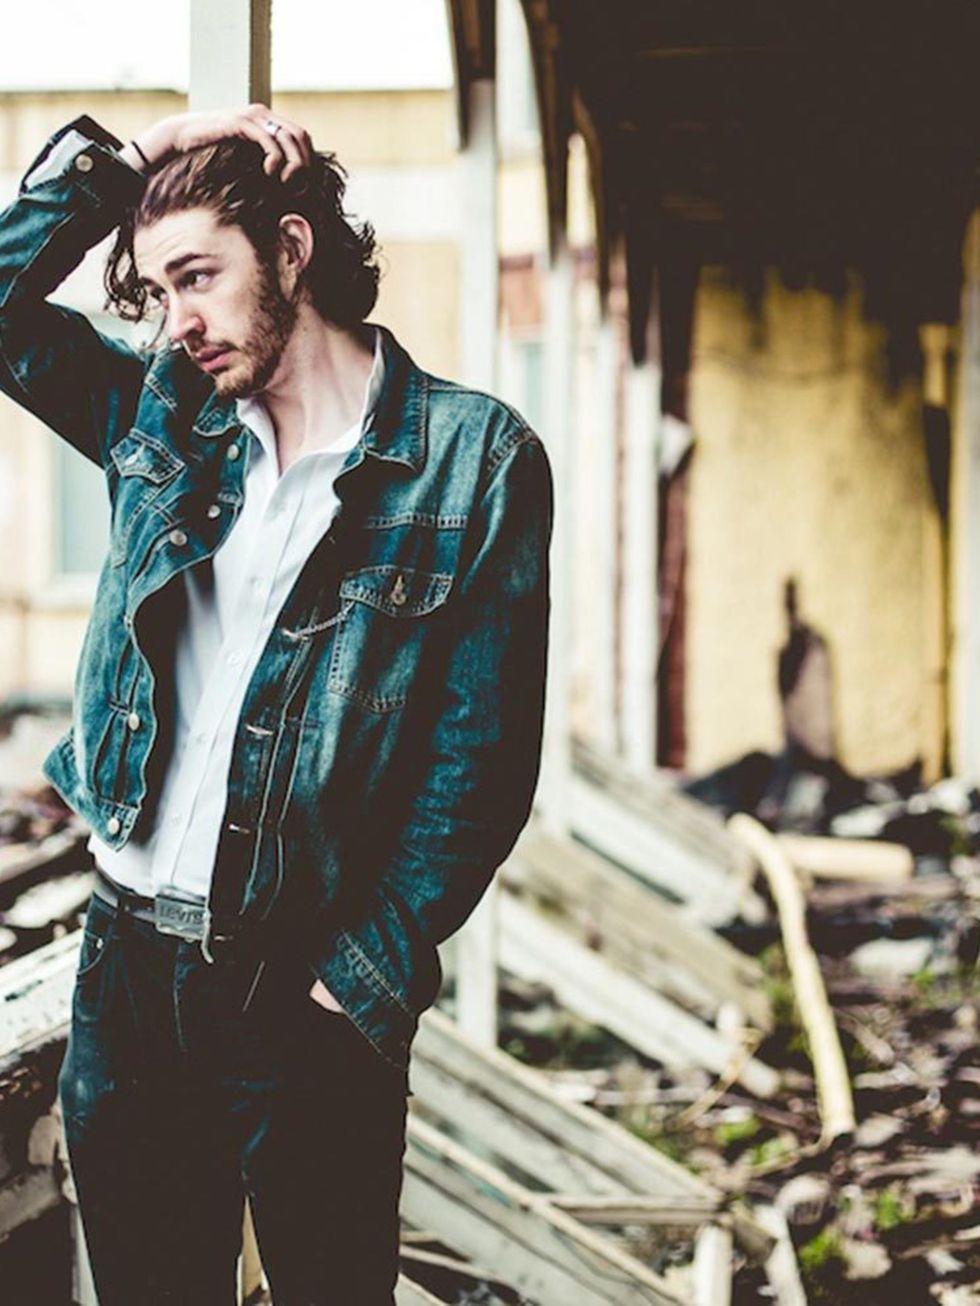 <p><strong>GIG: Hozier</strong></p>

<p><span style="line-height:1.6">Best known for the single Take Me To Church that launched his career, the Irish singer-songwriter is playing two dates in London this weekend before starting his US tour.</span></p>

<p